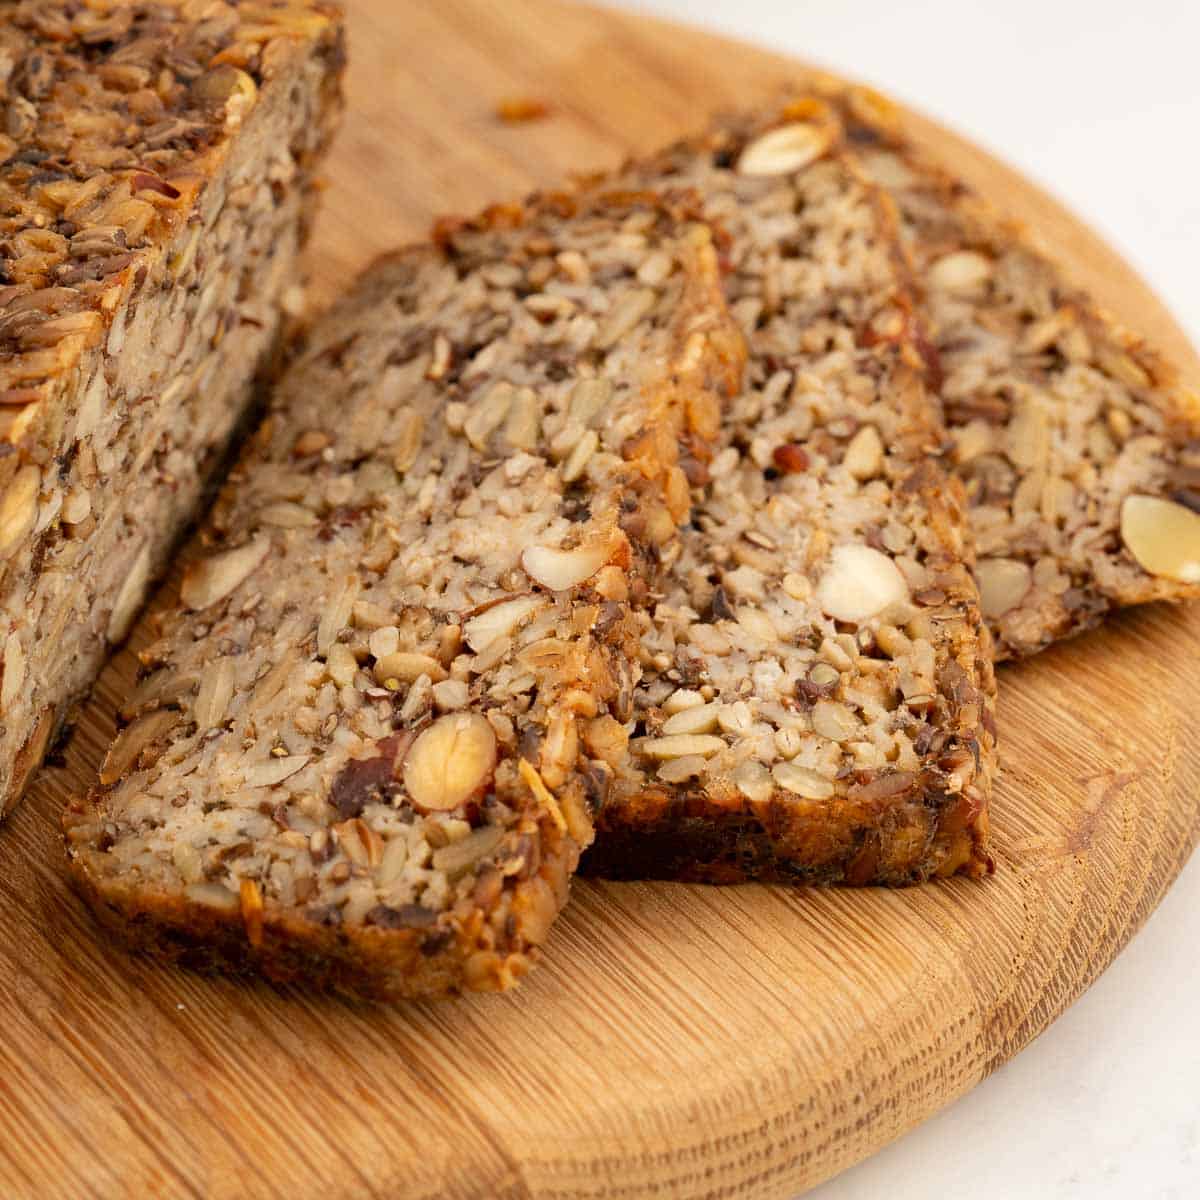 Close up of oat bread, nuts and seeds visible in the bread.